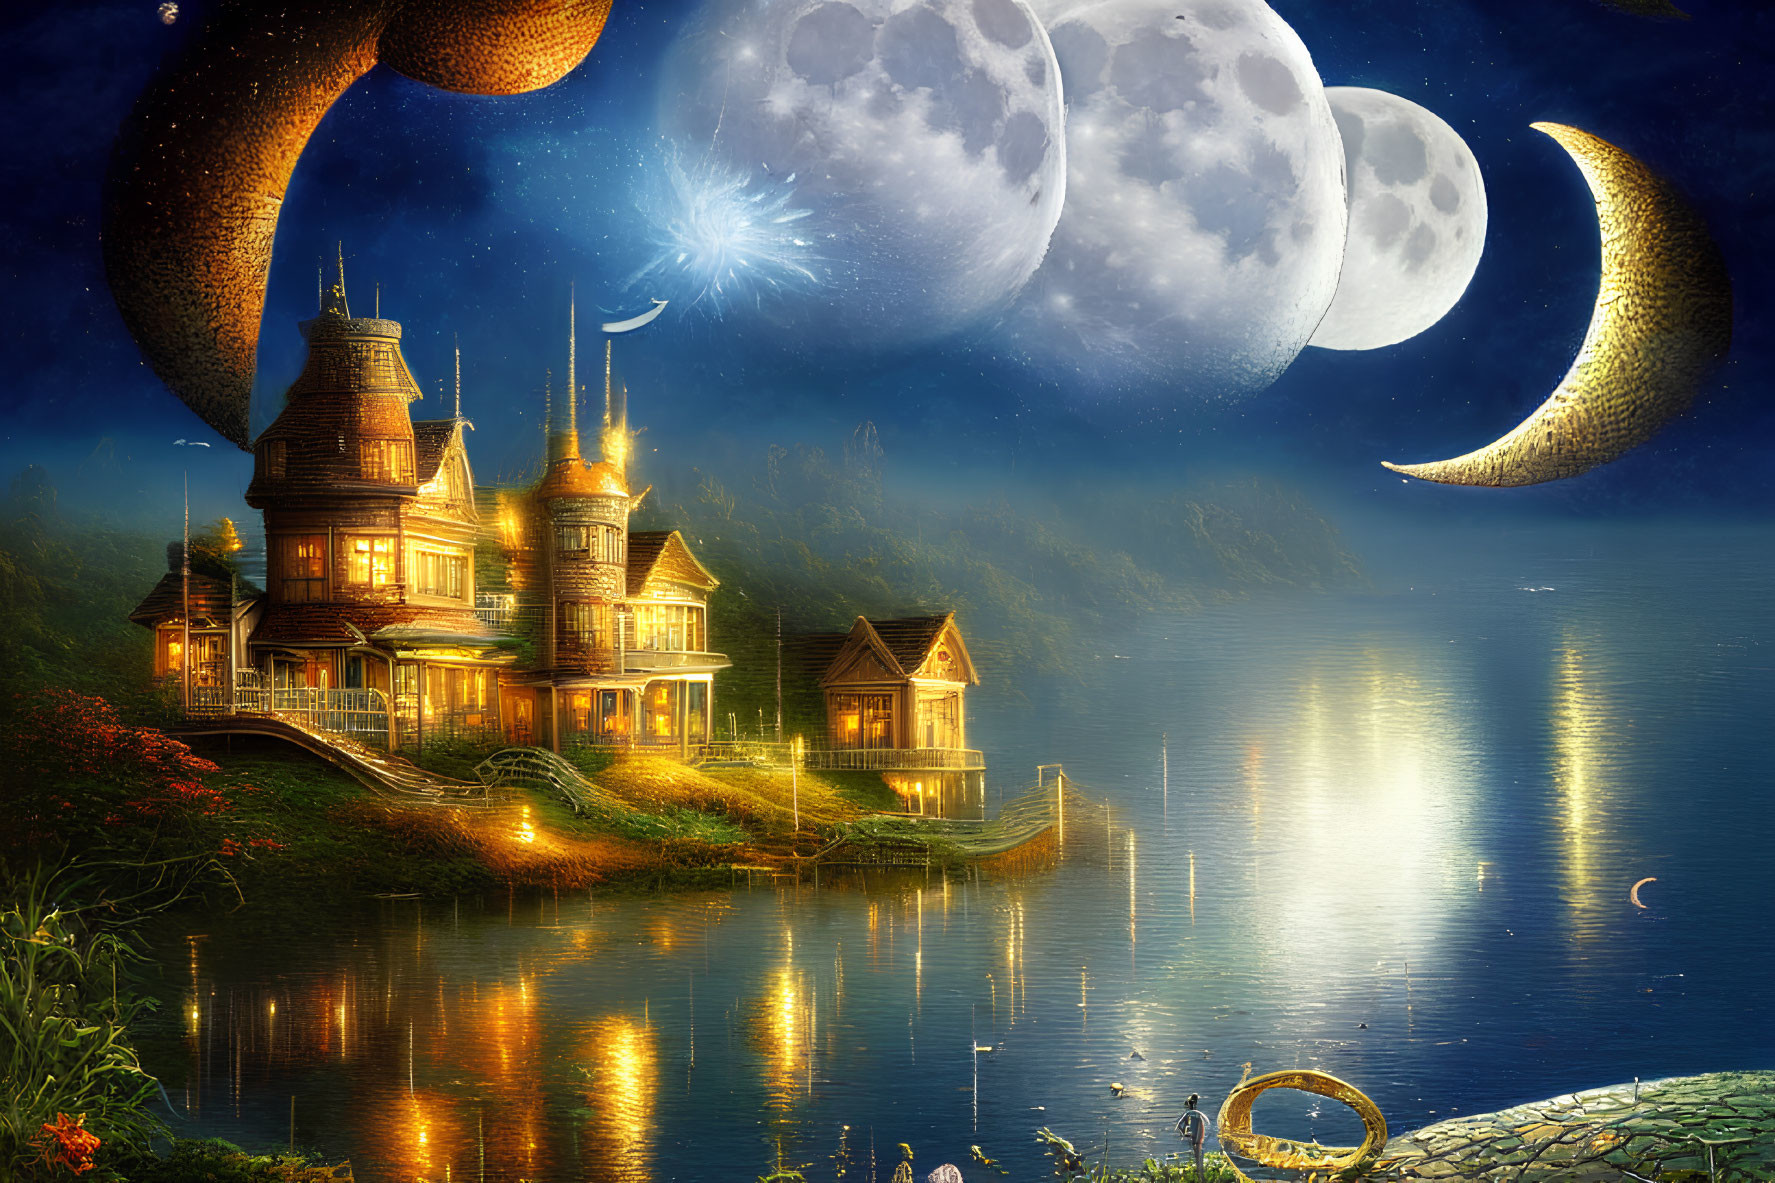 Fantasy lakeside mansion under multiple moons and shooting star.